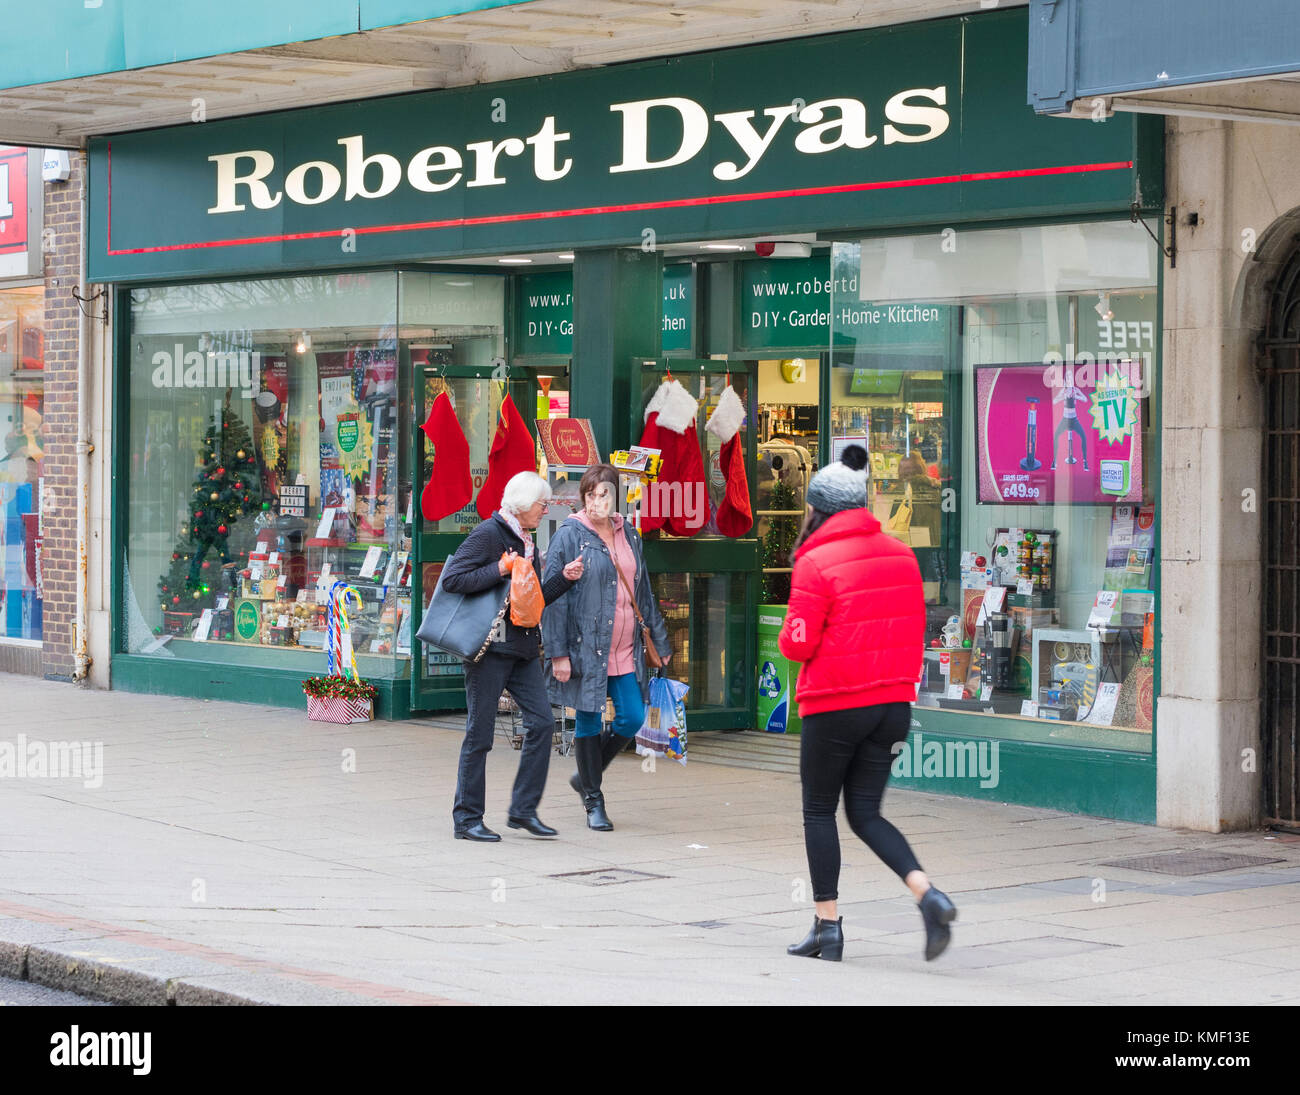 Robert Dyas shop front in the UK. Retail store. Stock Photo